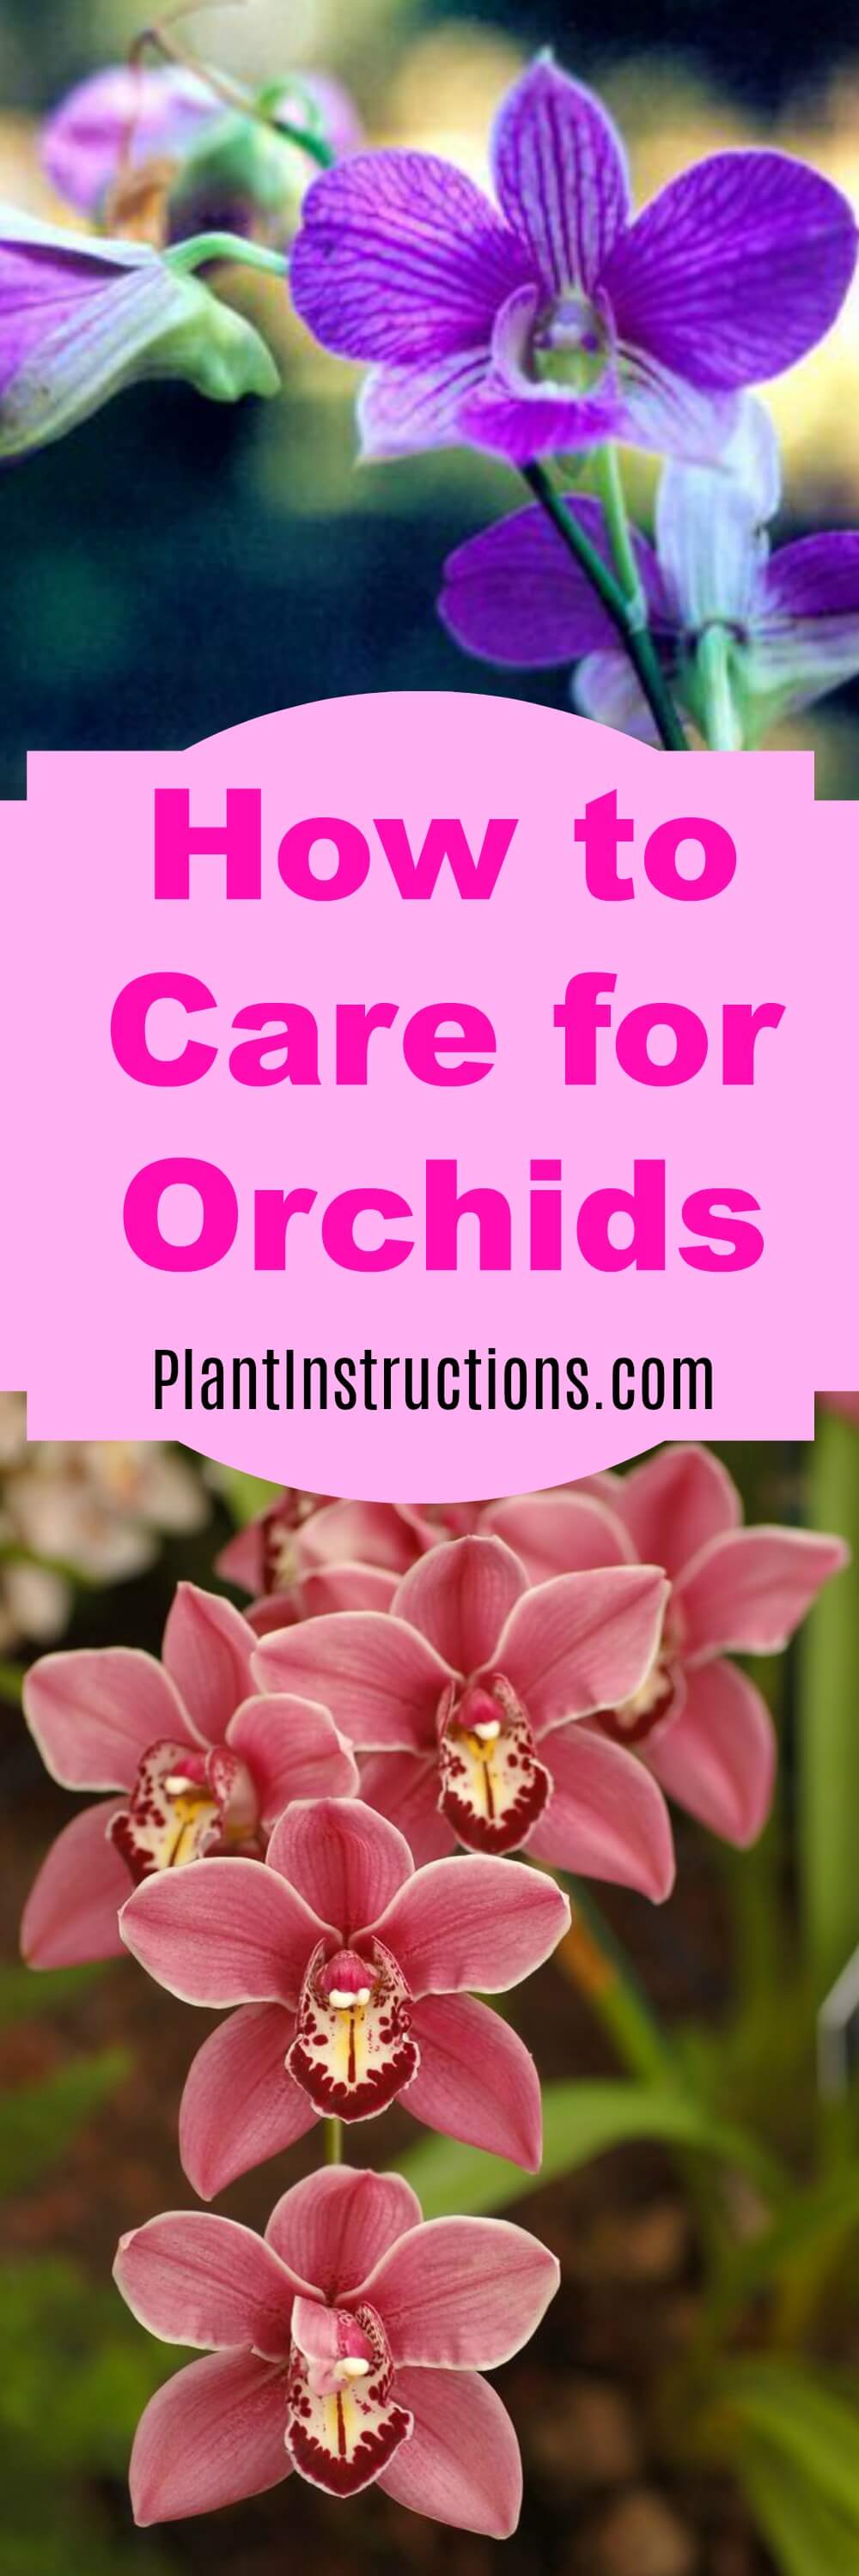 How To Care For Orchids Plant Instructions